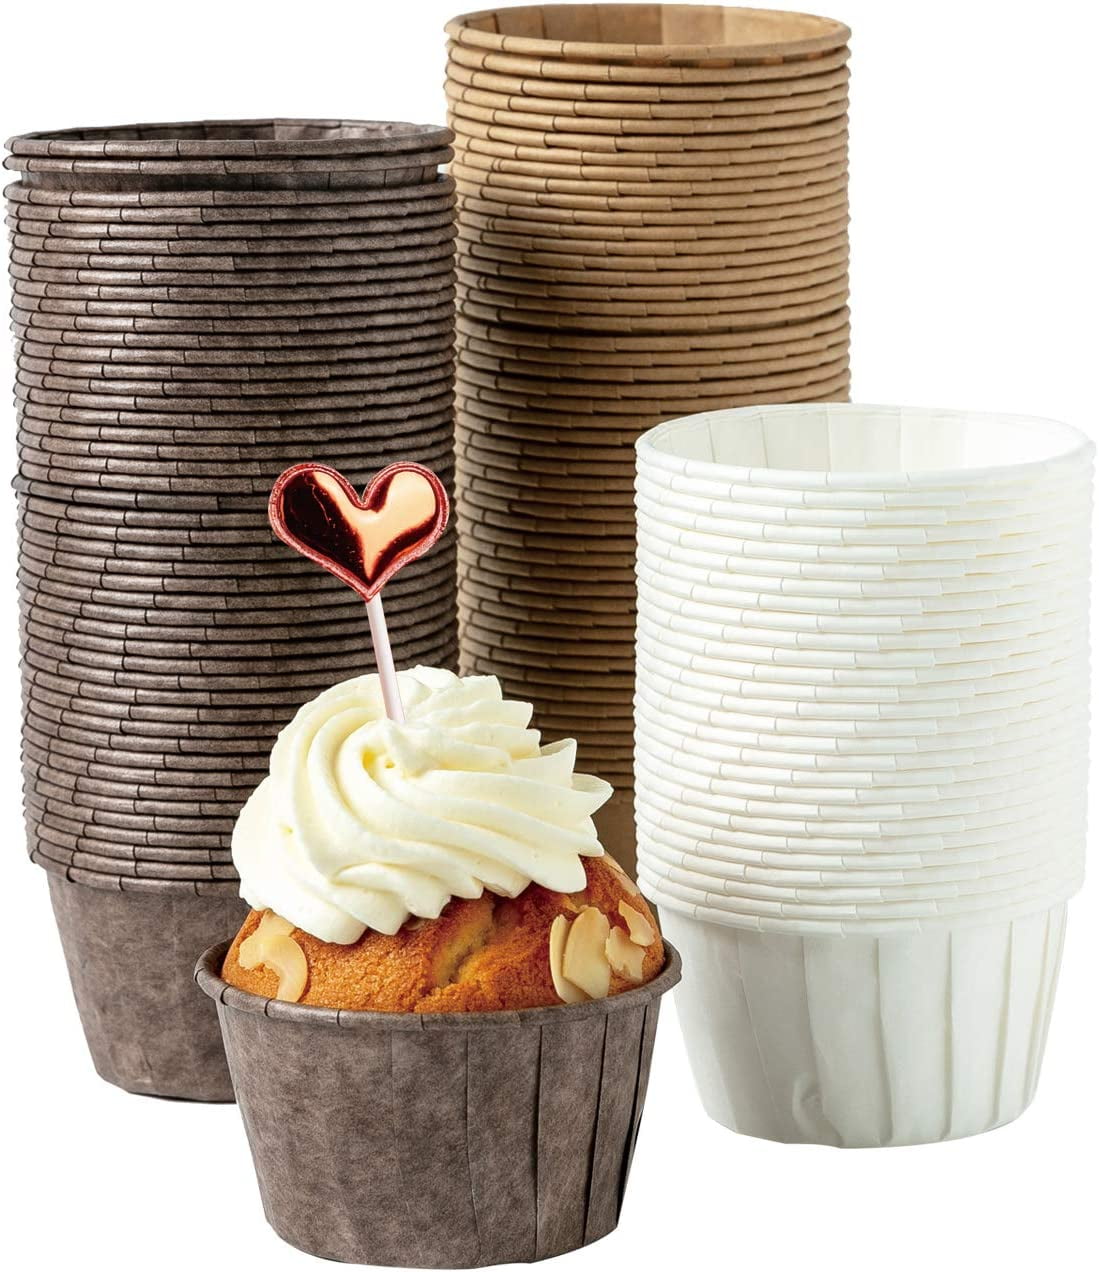 Muffin Liners for Baking - 50pcs White Extra Large Size Cupcake Liners Baking Supplies, Thick Jumbo Parchment Paper Sheets Cute Cups, Greaseproof